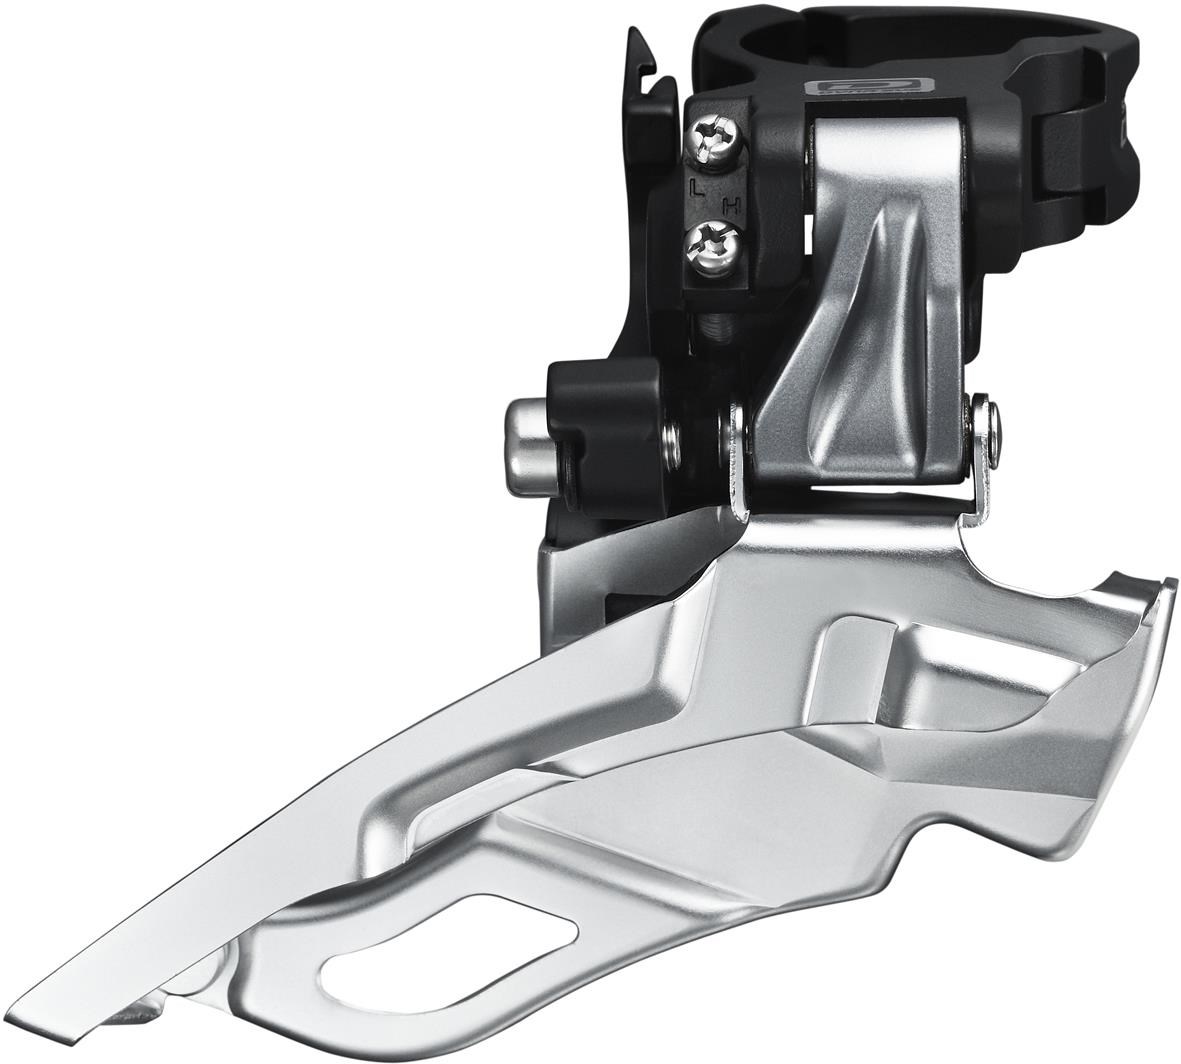 Shimano FD-M611 Deore 10 Speed Triple Front Derailleur Conventional Swing Dual Pull product image